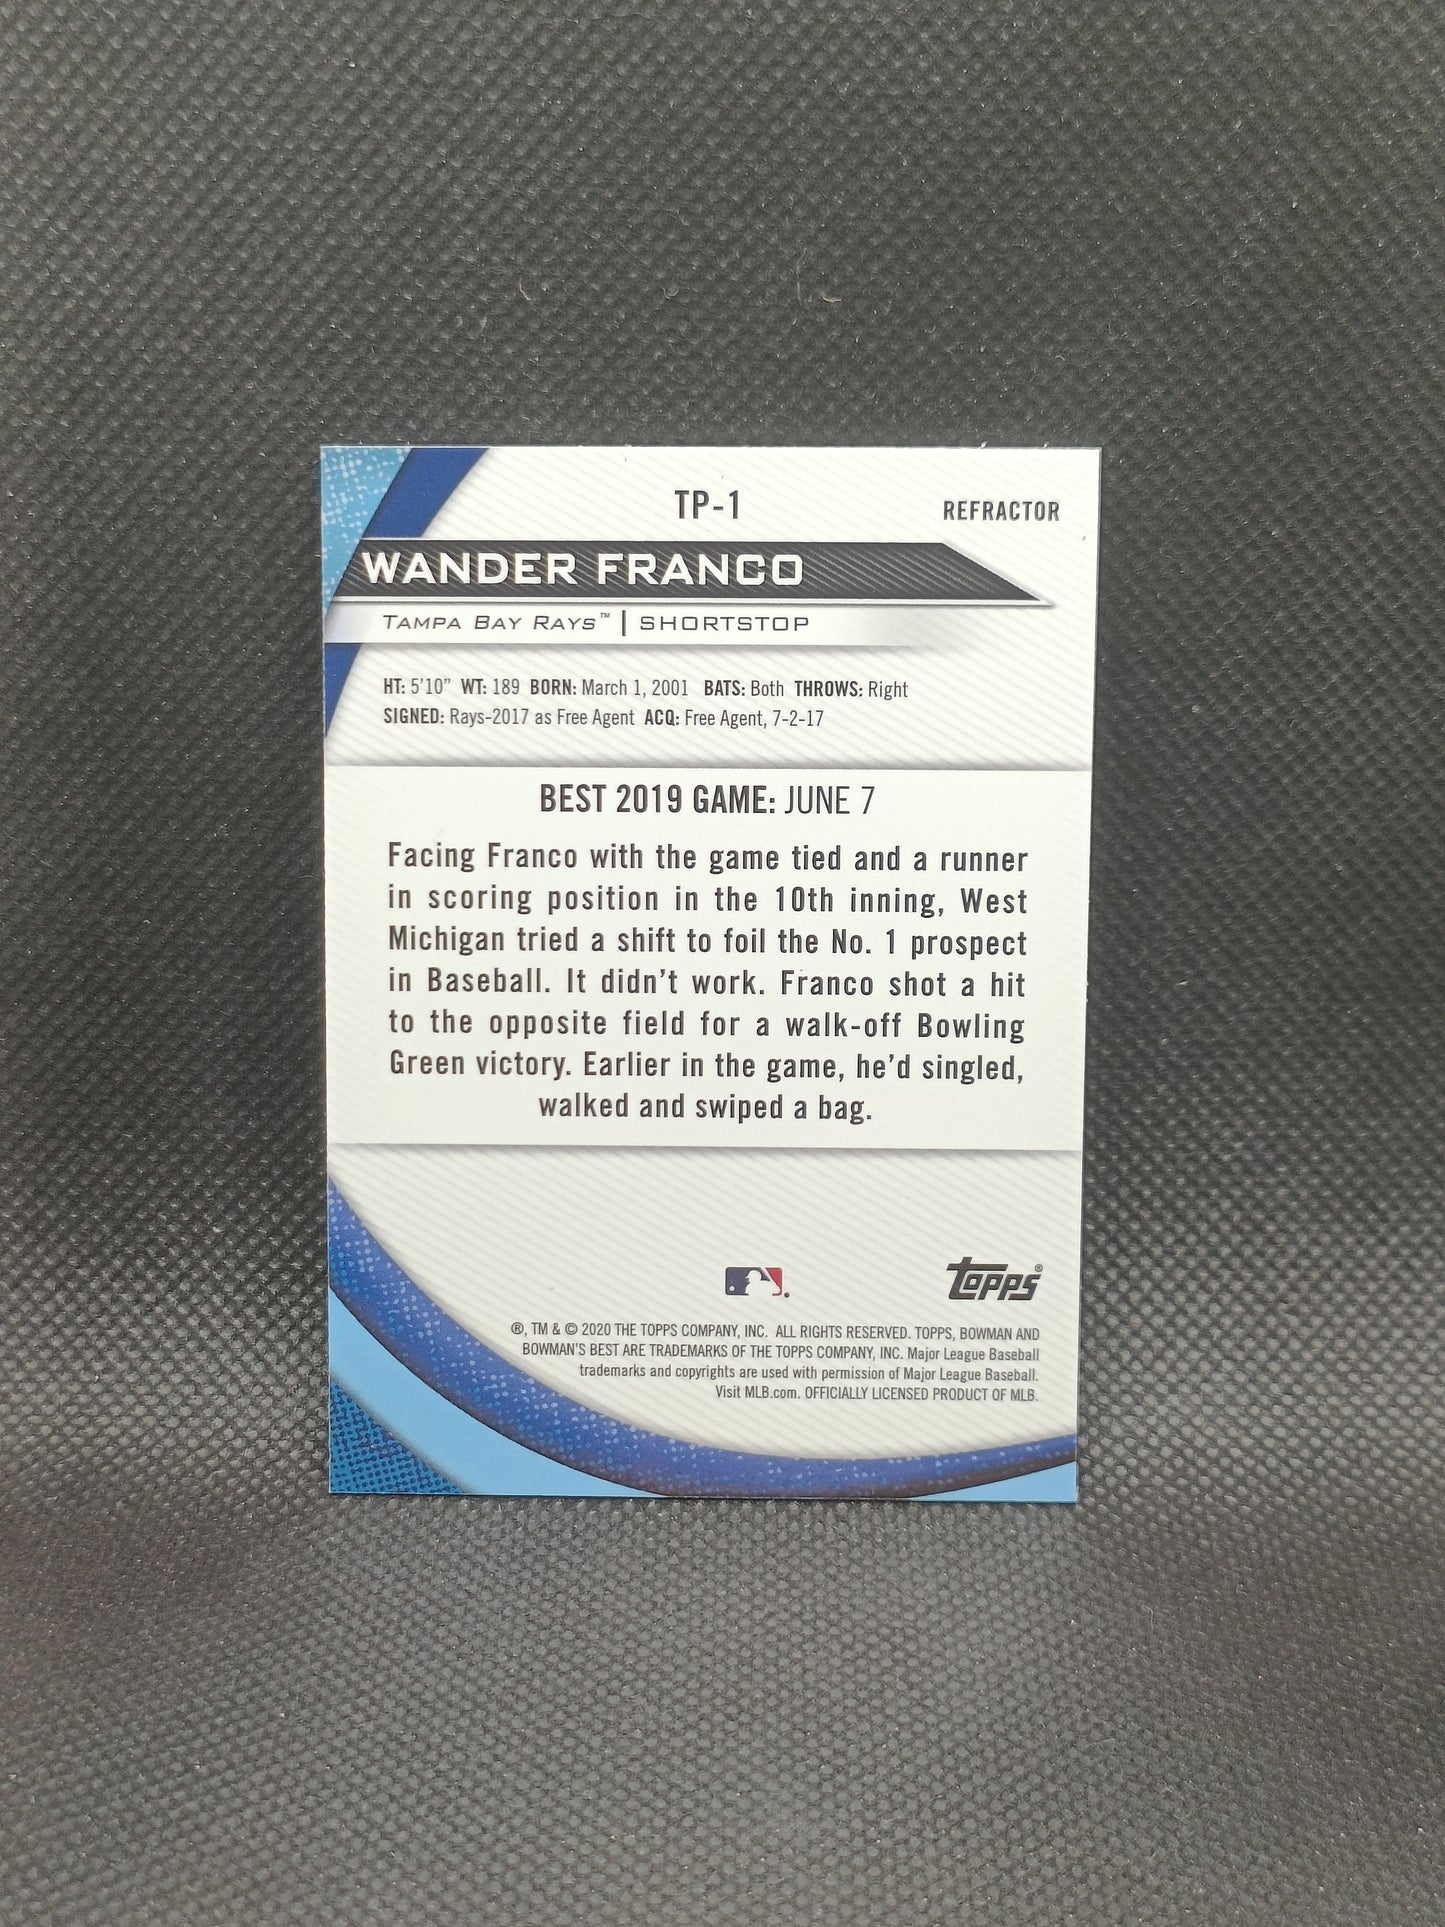 Wander Franco - 2020 Bowman's Best Refractor - Tampa Bay Rays